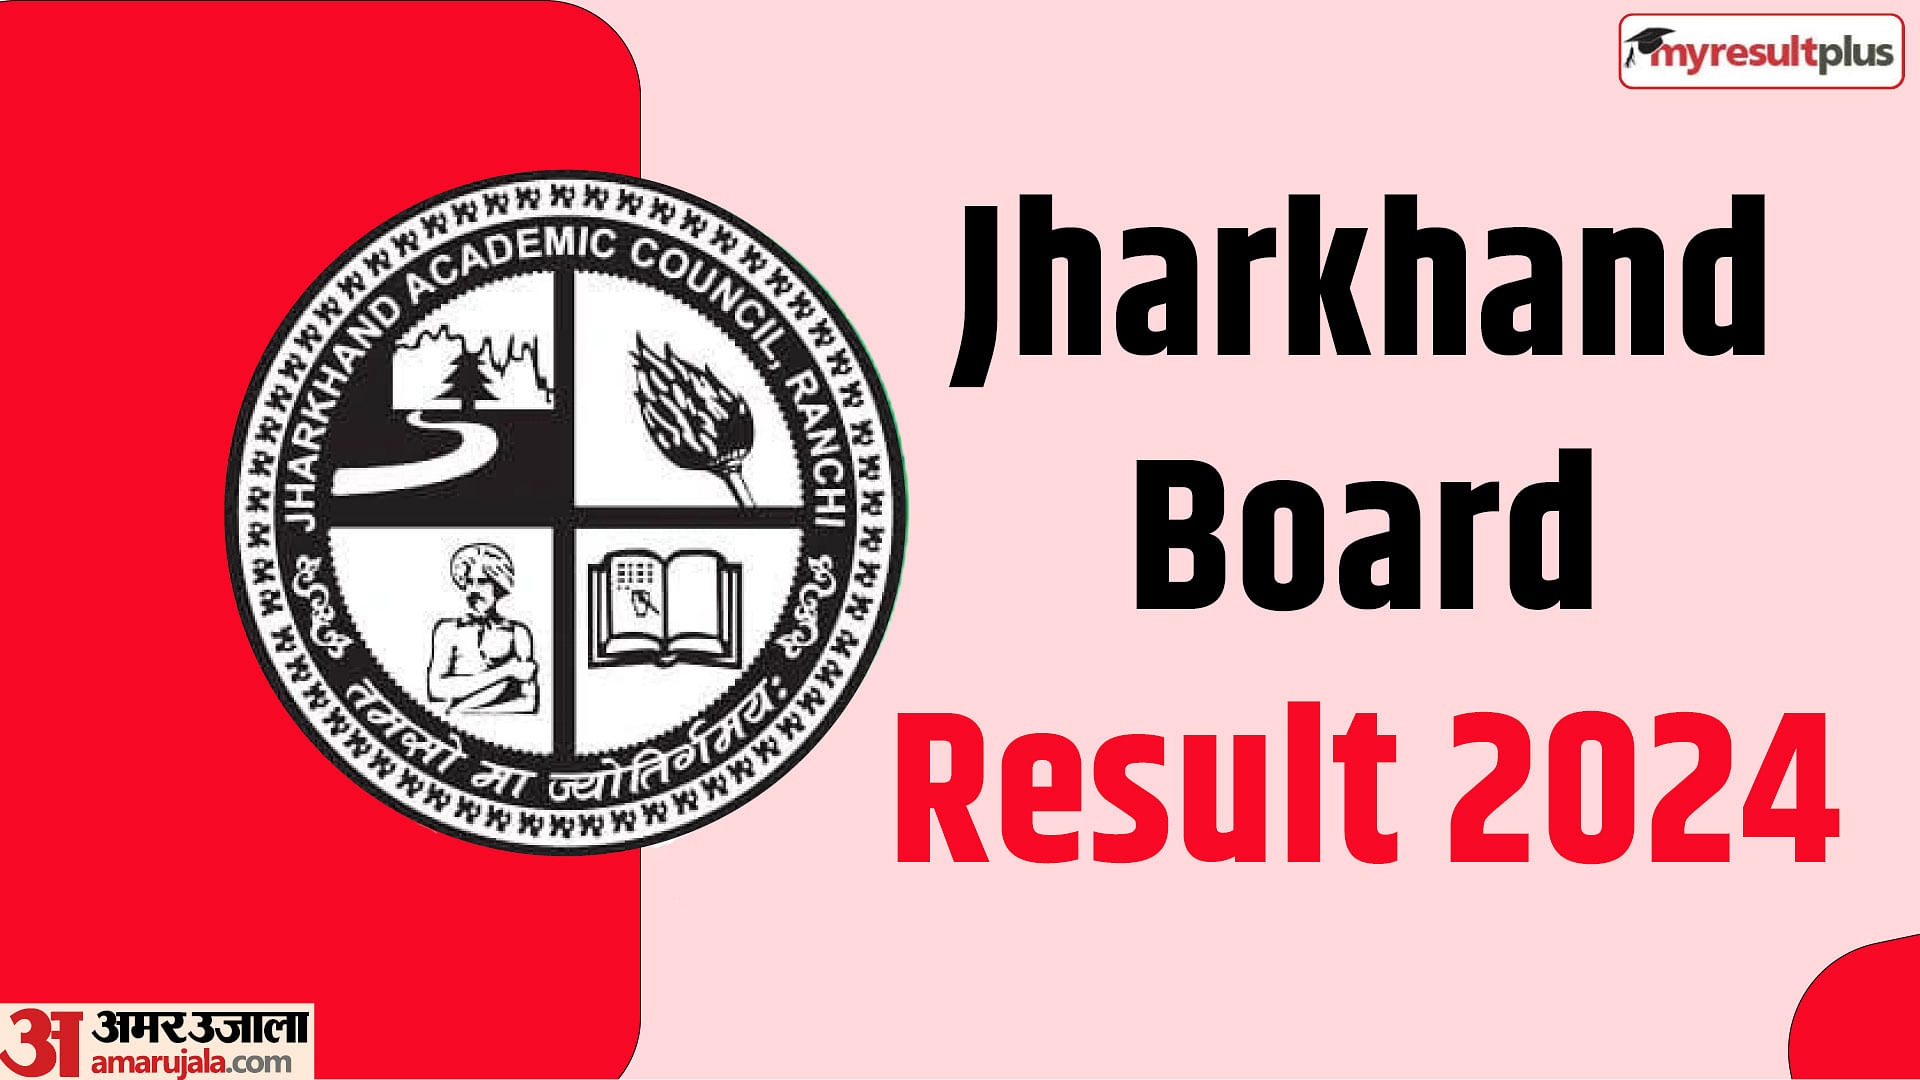 Jharkhand board result 2024 class 12 soon, Check all important updates here